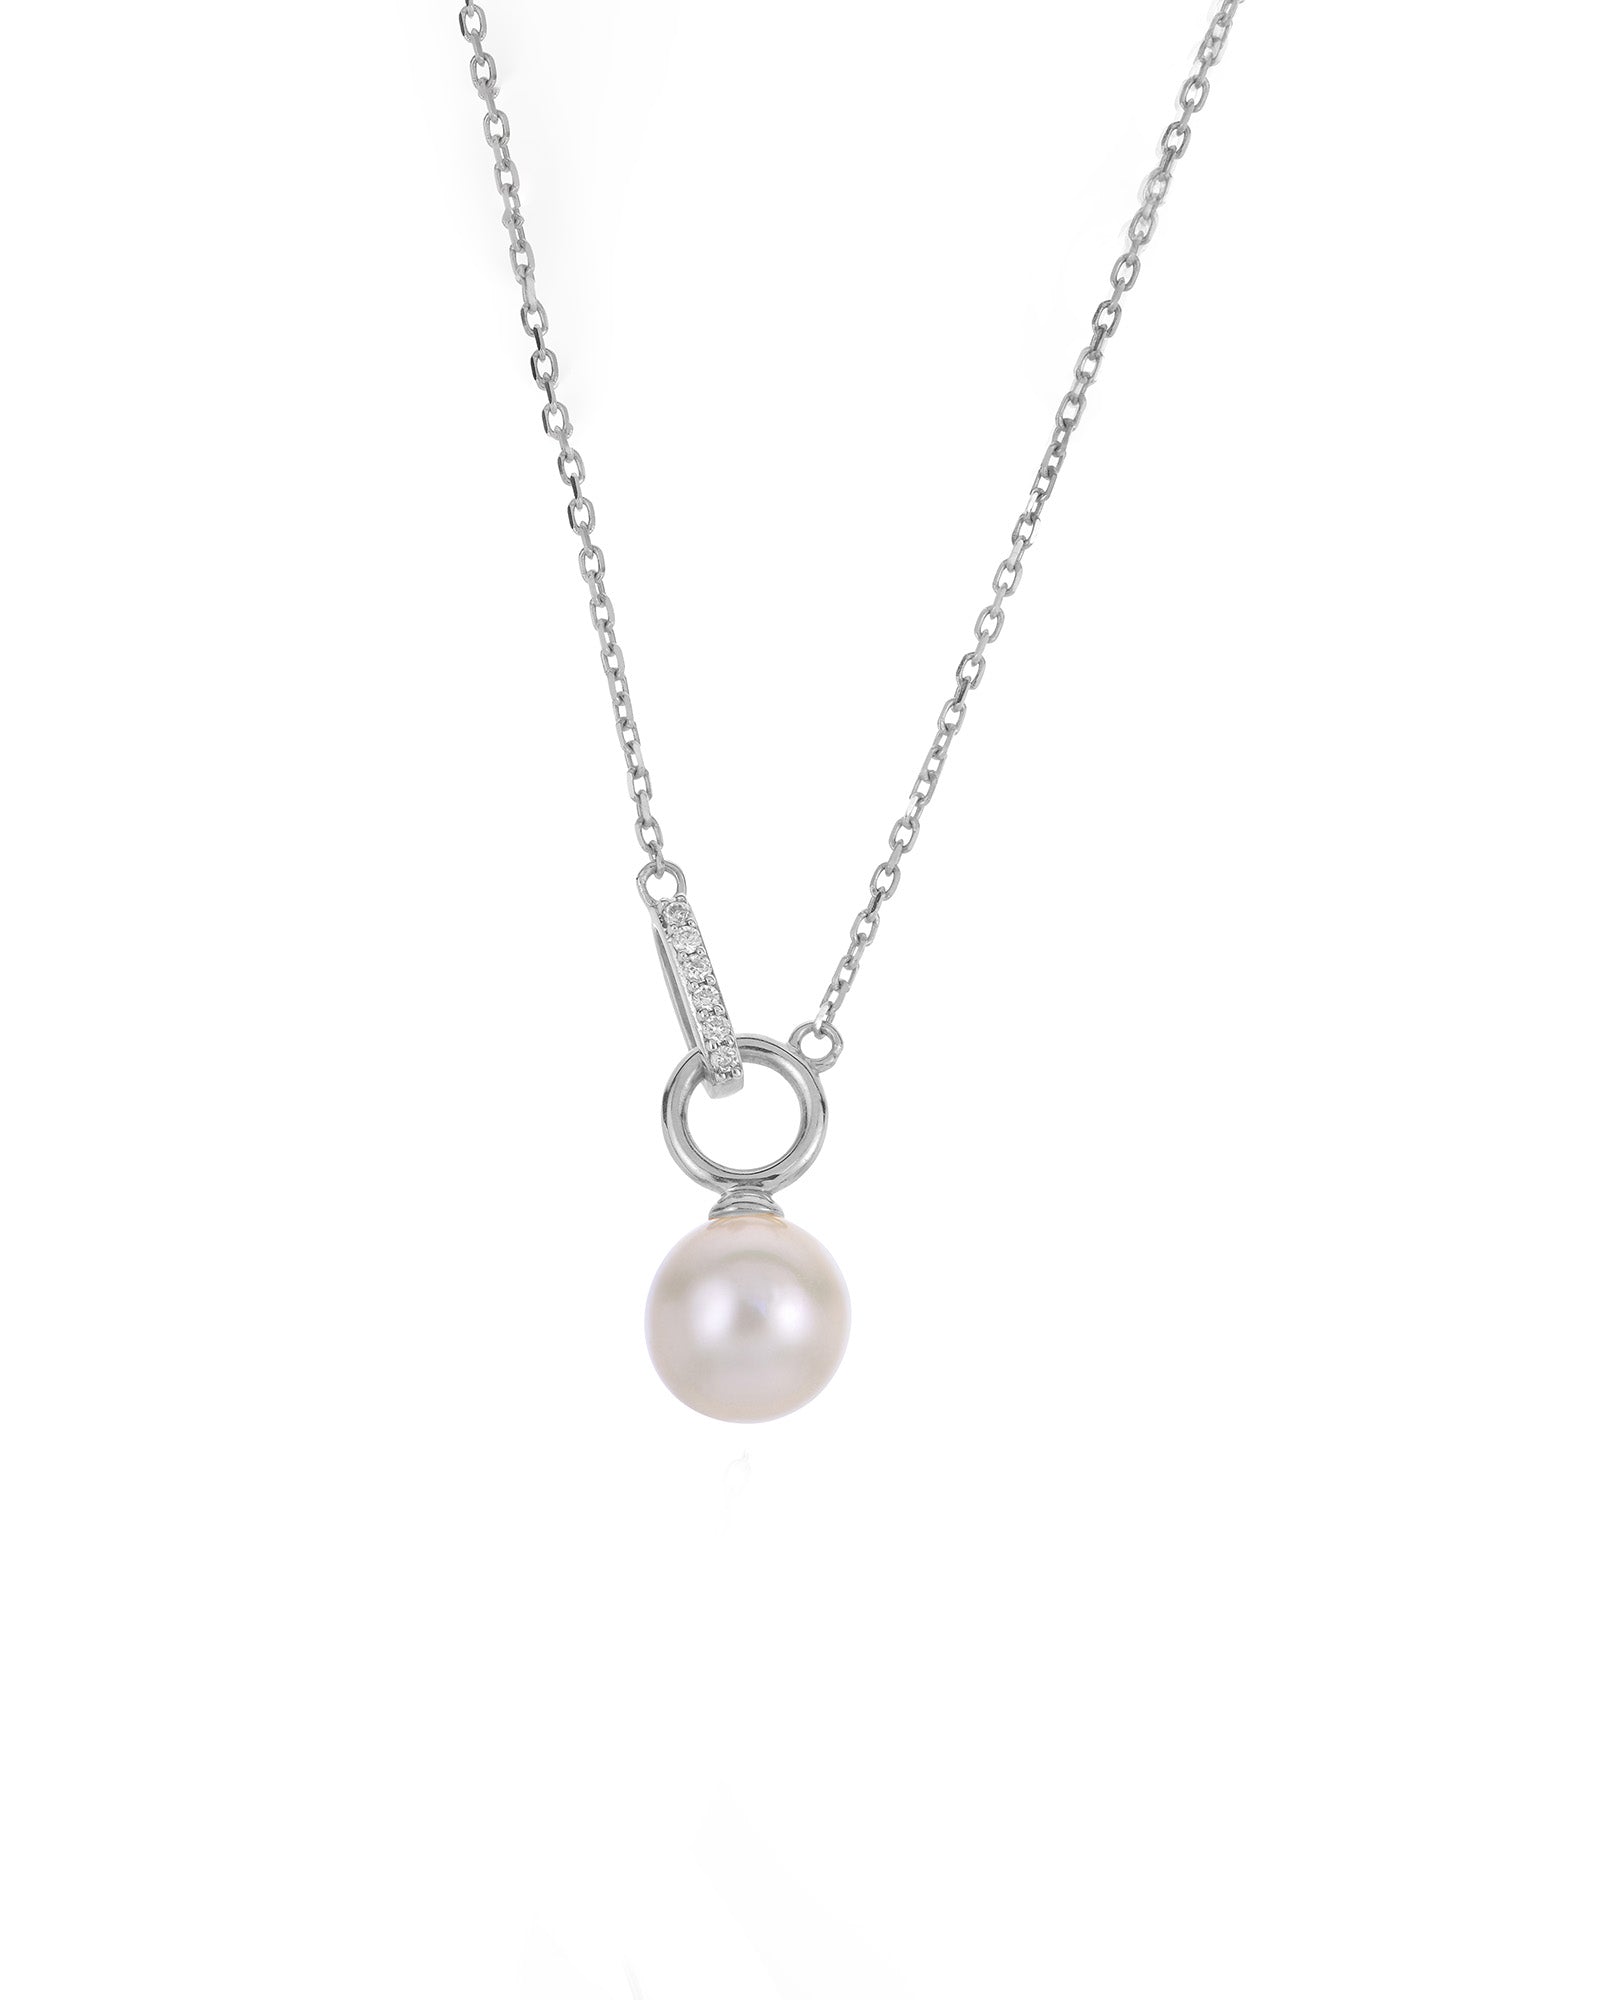 Akoya pearl and Bar necklace